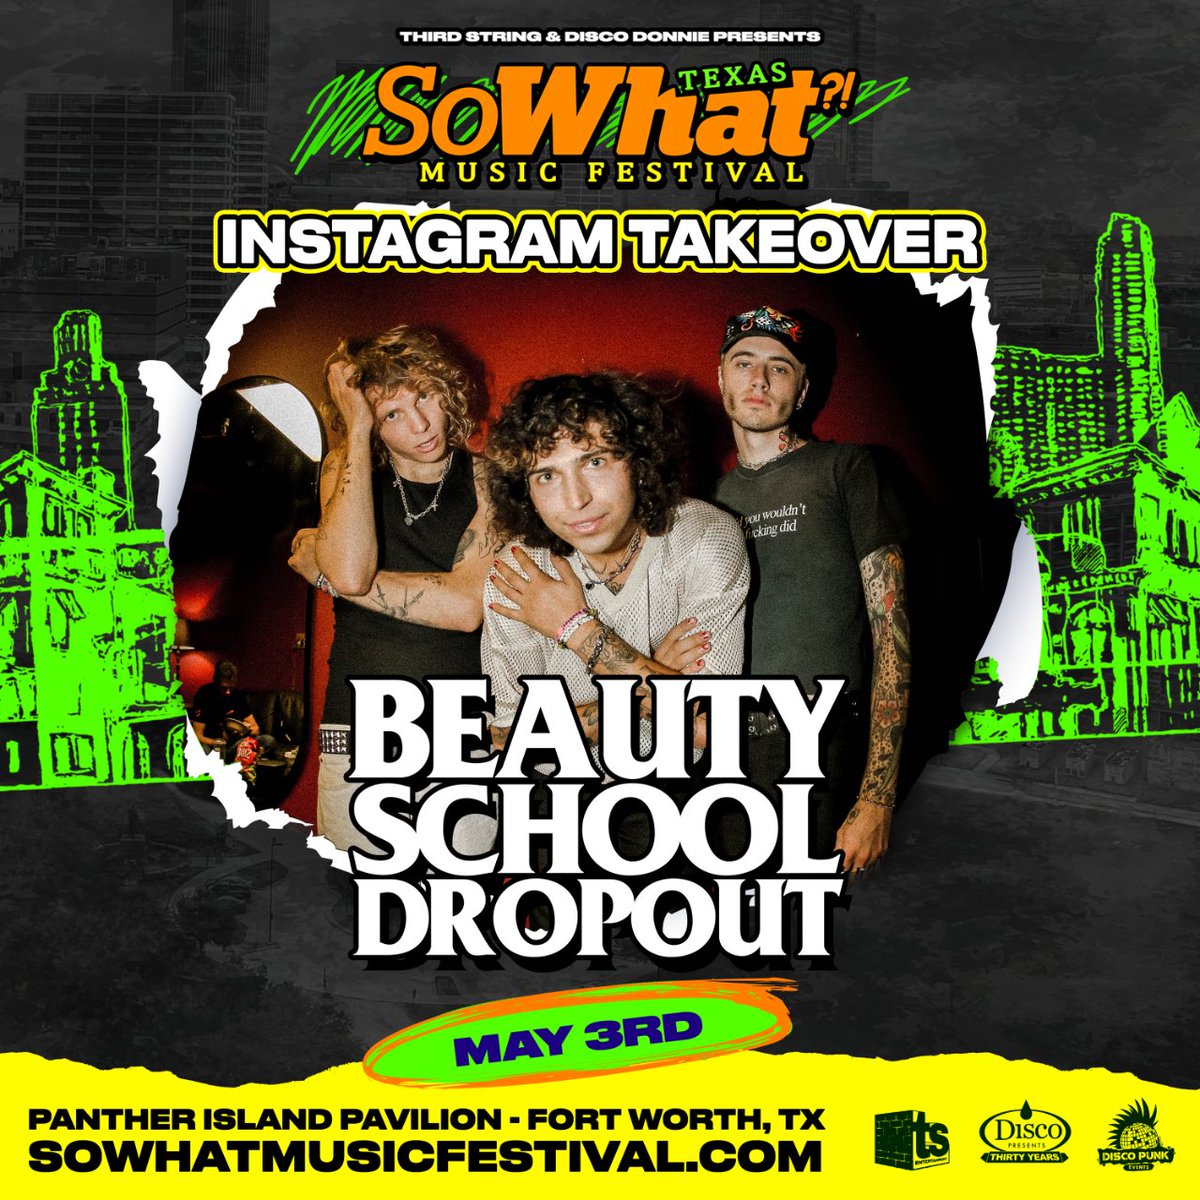 🗣️ calling all Dropouts - tune into our Instagram THIS FRIDAY May 3rd for some fun with @bsd_wav 🌟 instagram.com/sowhatmusicfes…